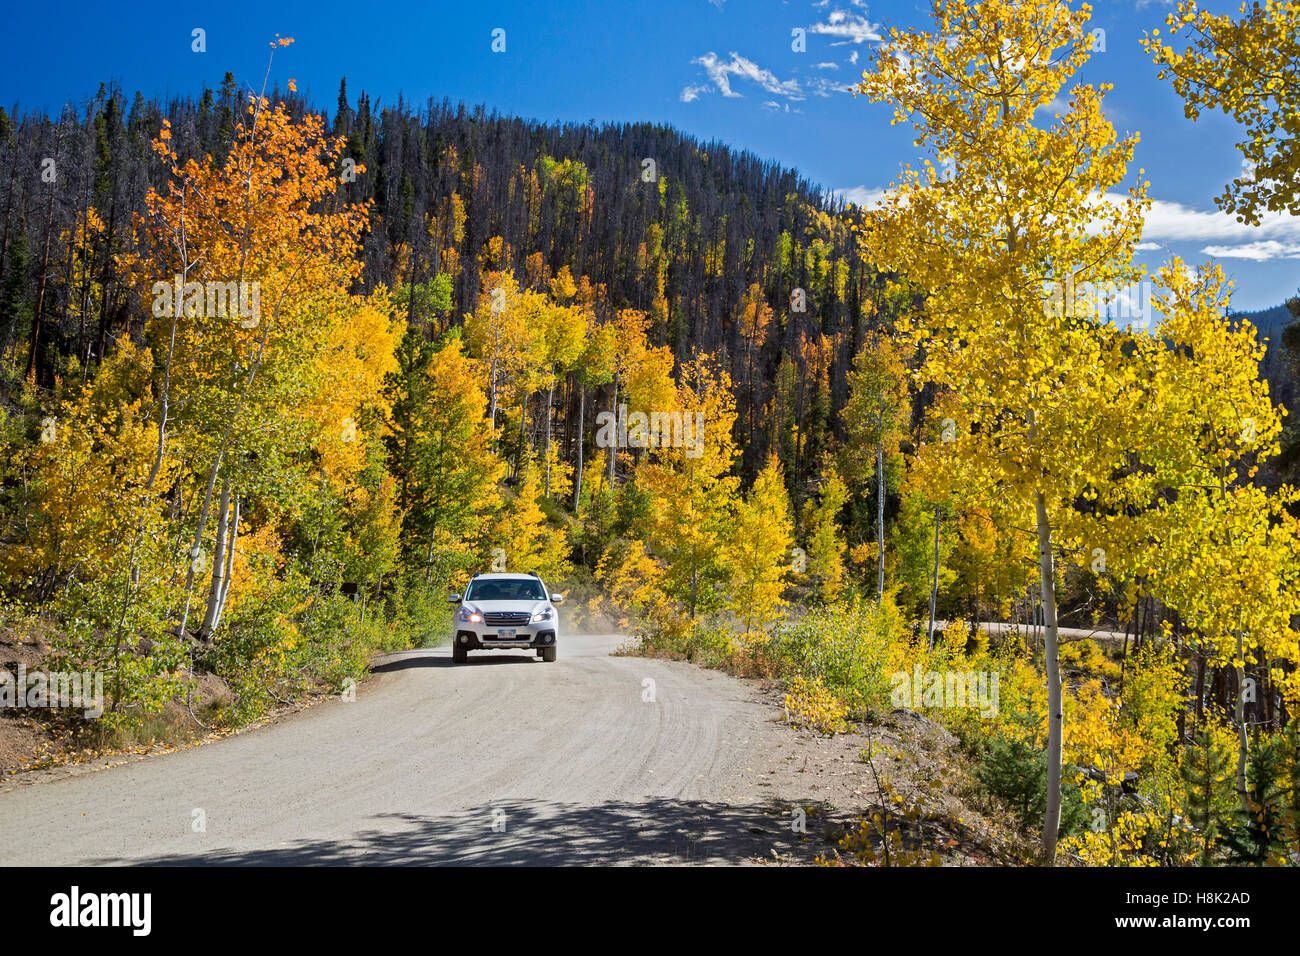 Tabernash, Colorado - Fall colors along a dirt road in the Rocky Mountains. Stock Photo